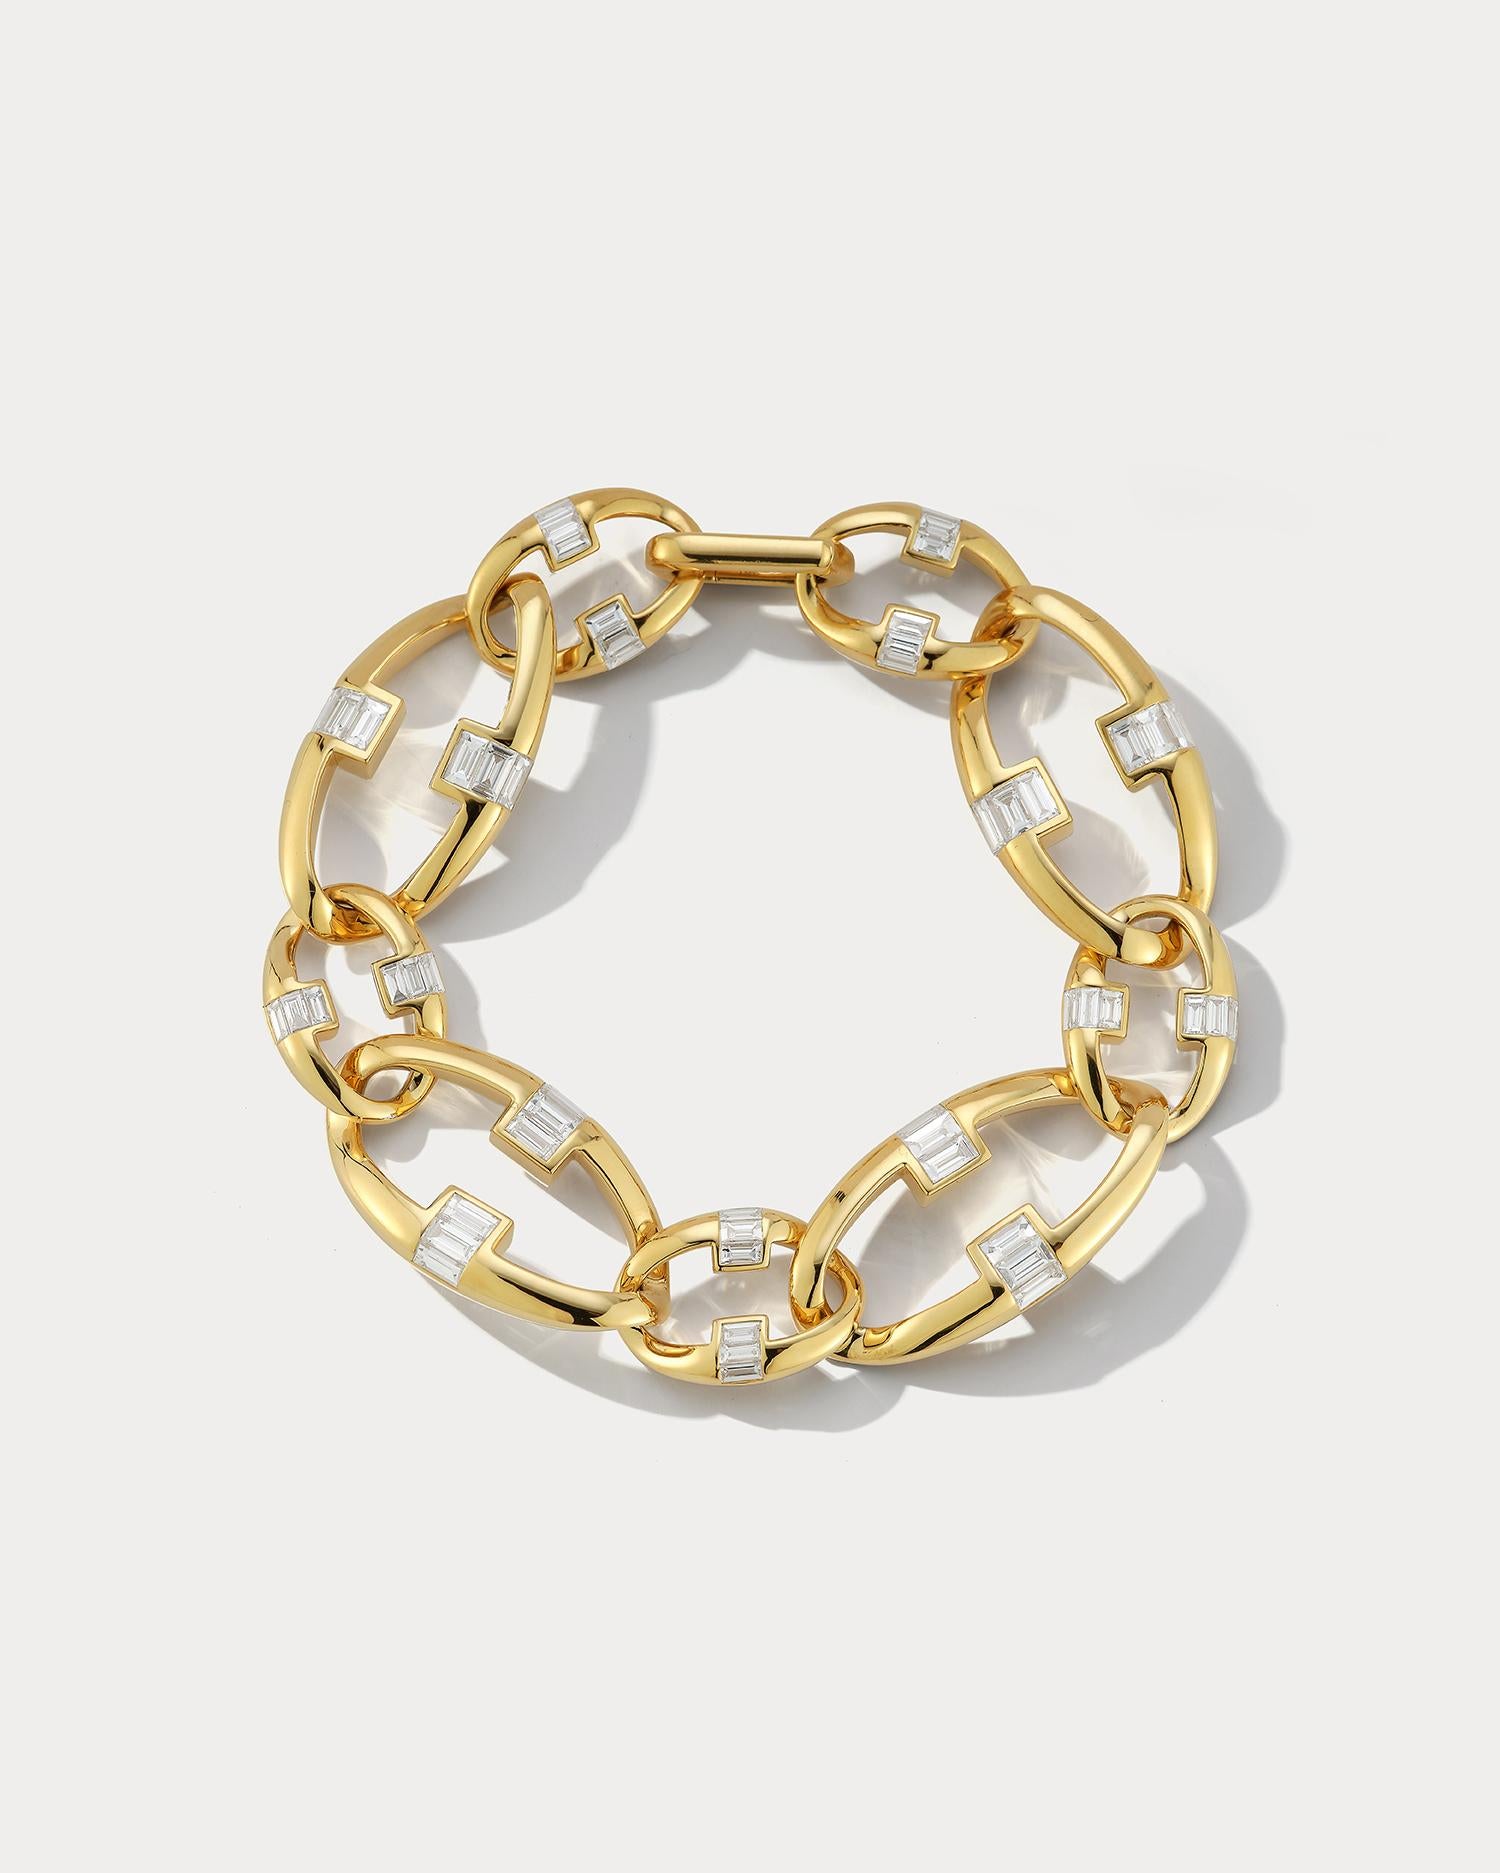 Ammrada Link Bracelet In New Condition For Sale In Palm Beach, FL